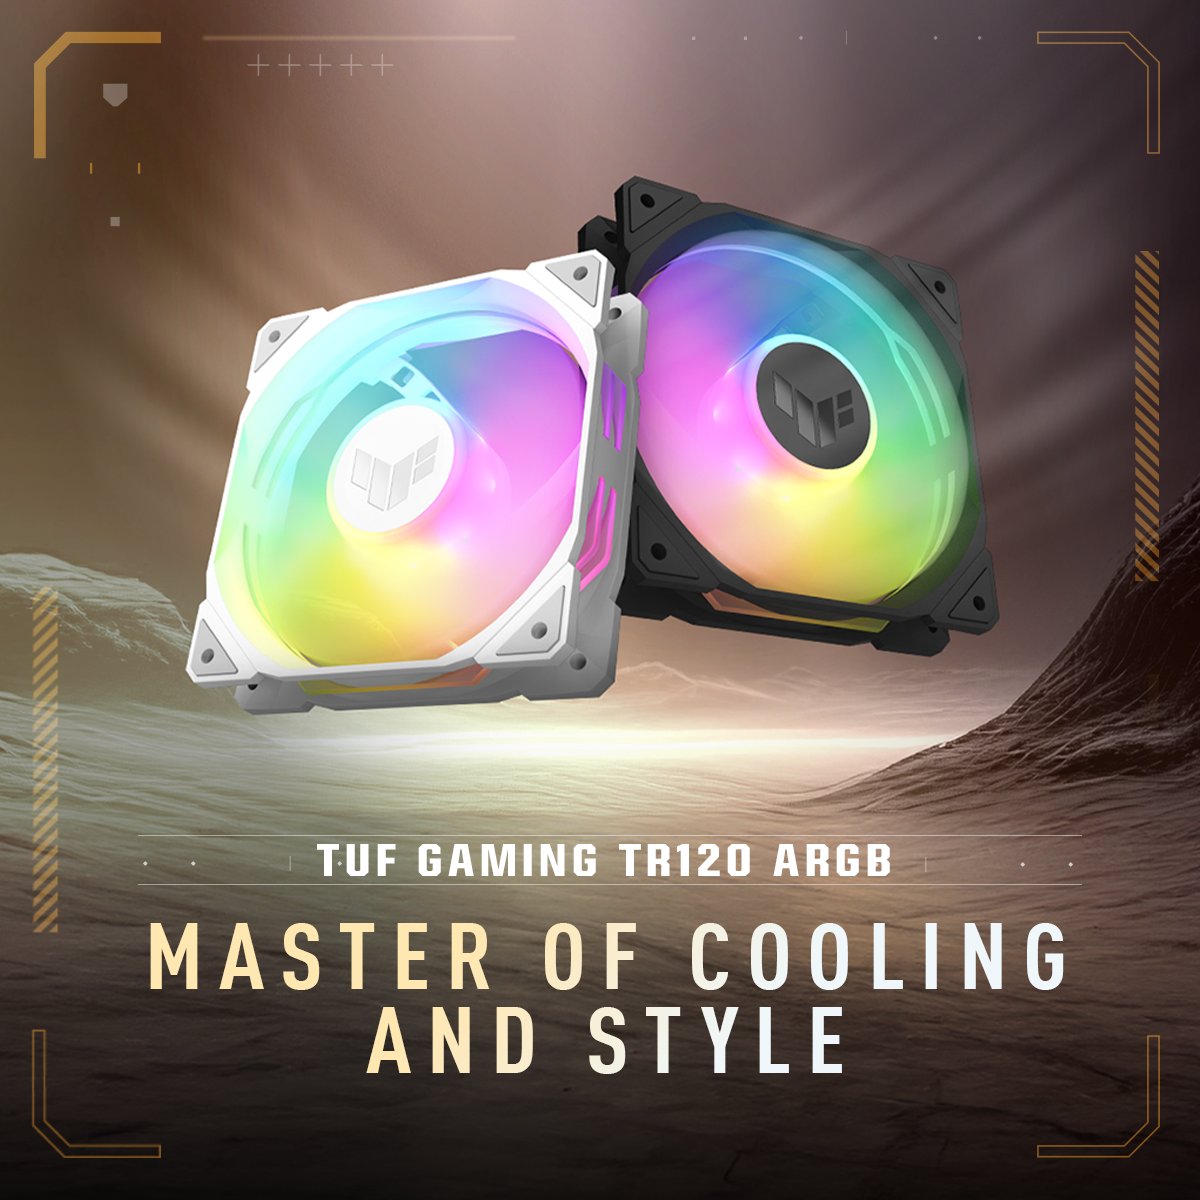 Redefine cooling with the #TUFGaming TR120 ARGB case fans! 
Maximize performance with its robust 28mm thick frame and top-tier static pressure, while #AuraSync compatibility transforms your rig into a light show.

Standard: asus.click/TR120
Reverse: asus.click/TR120reverse